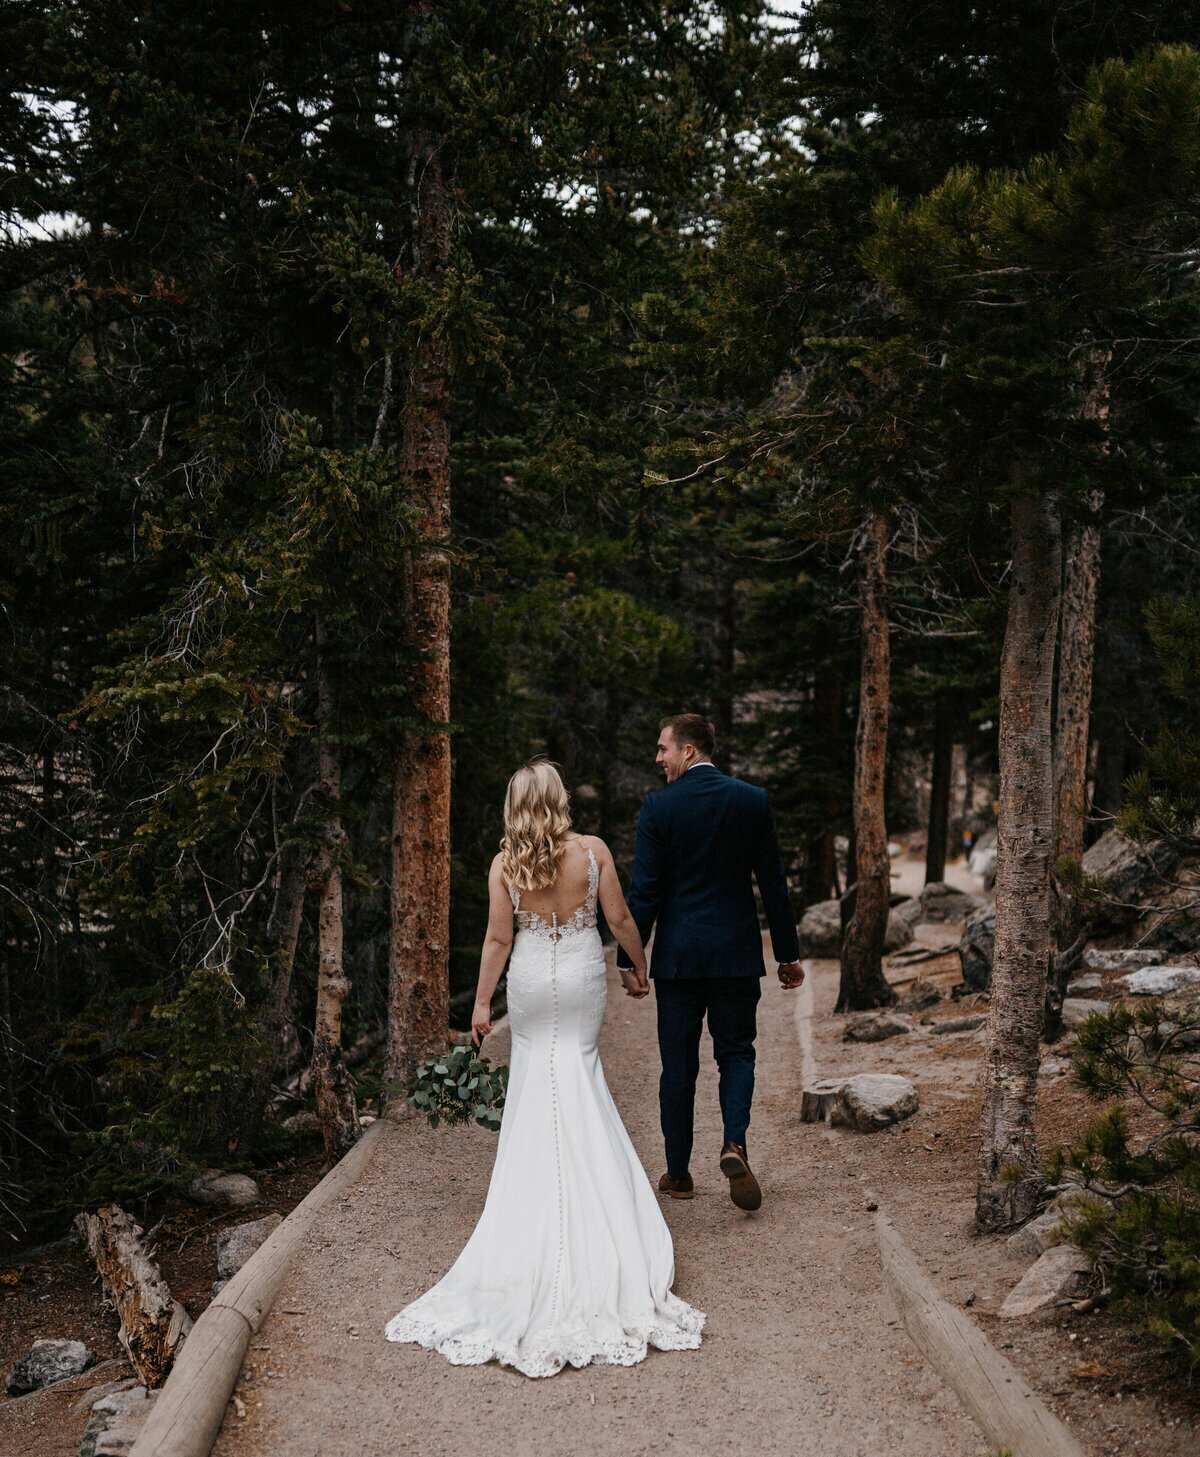 minnesota wedding photographer and videographer based in minneapolis minnesota. A husband and wife photo and video team capturing adventure and destination weddings.